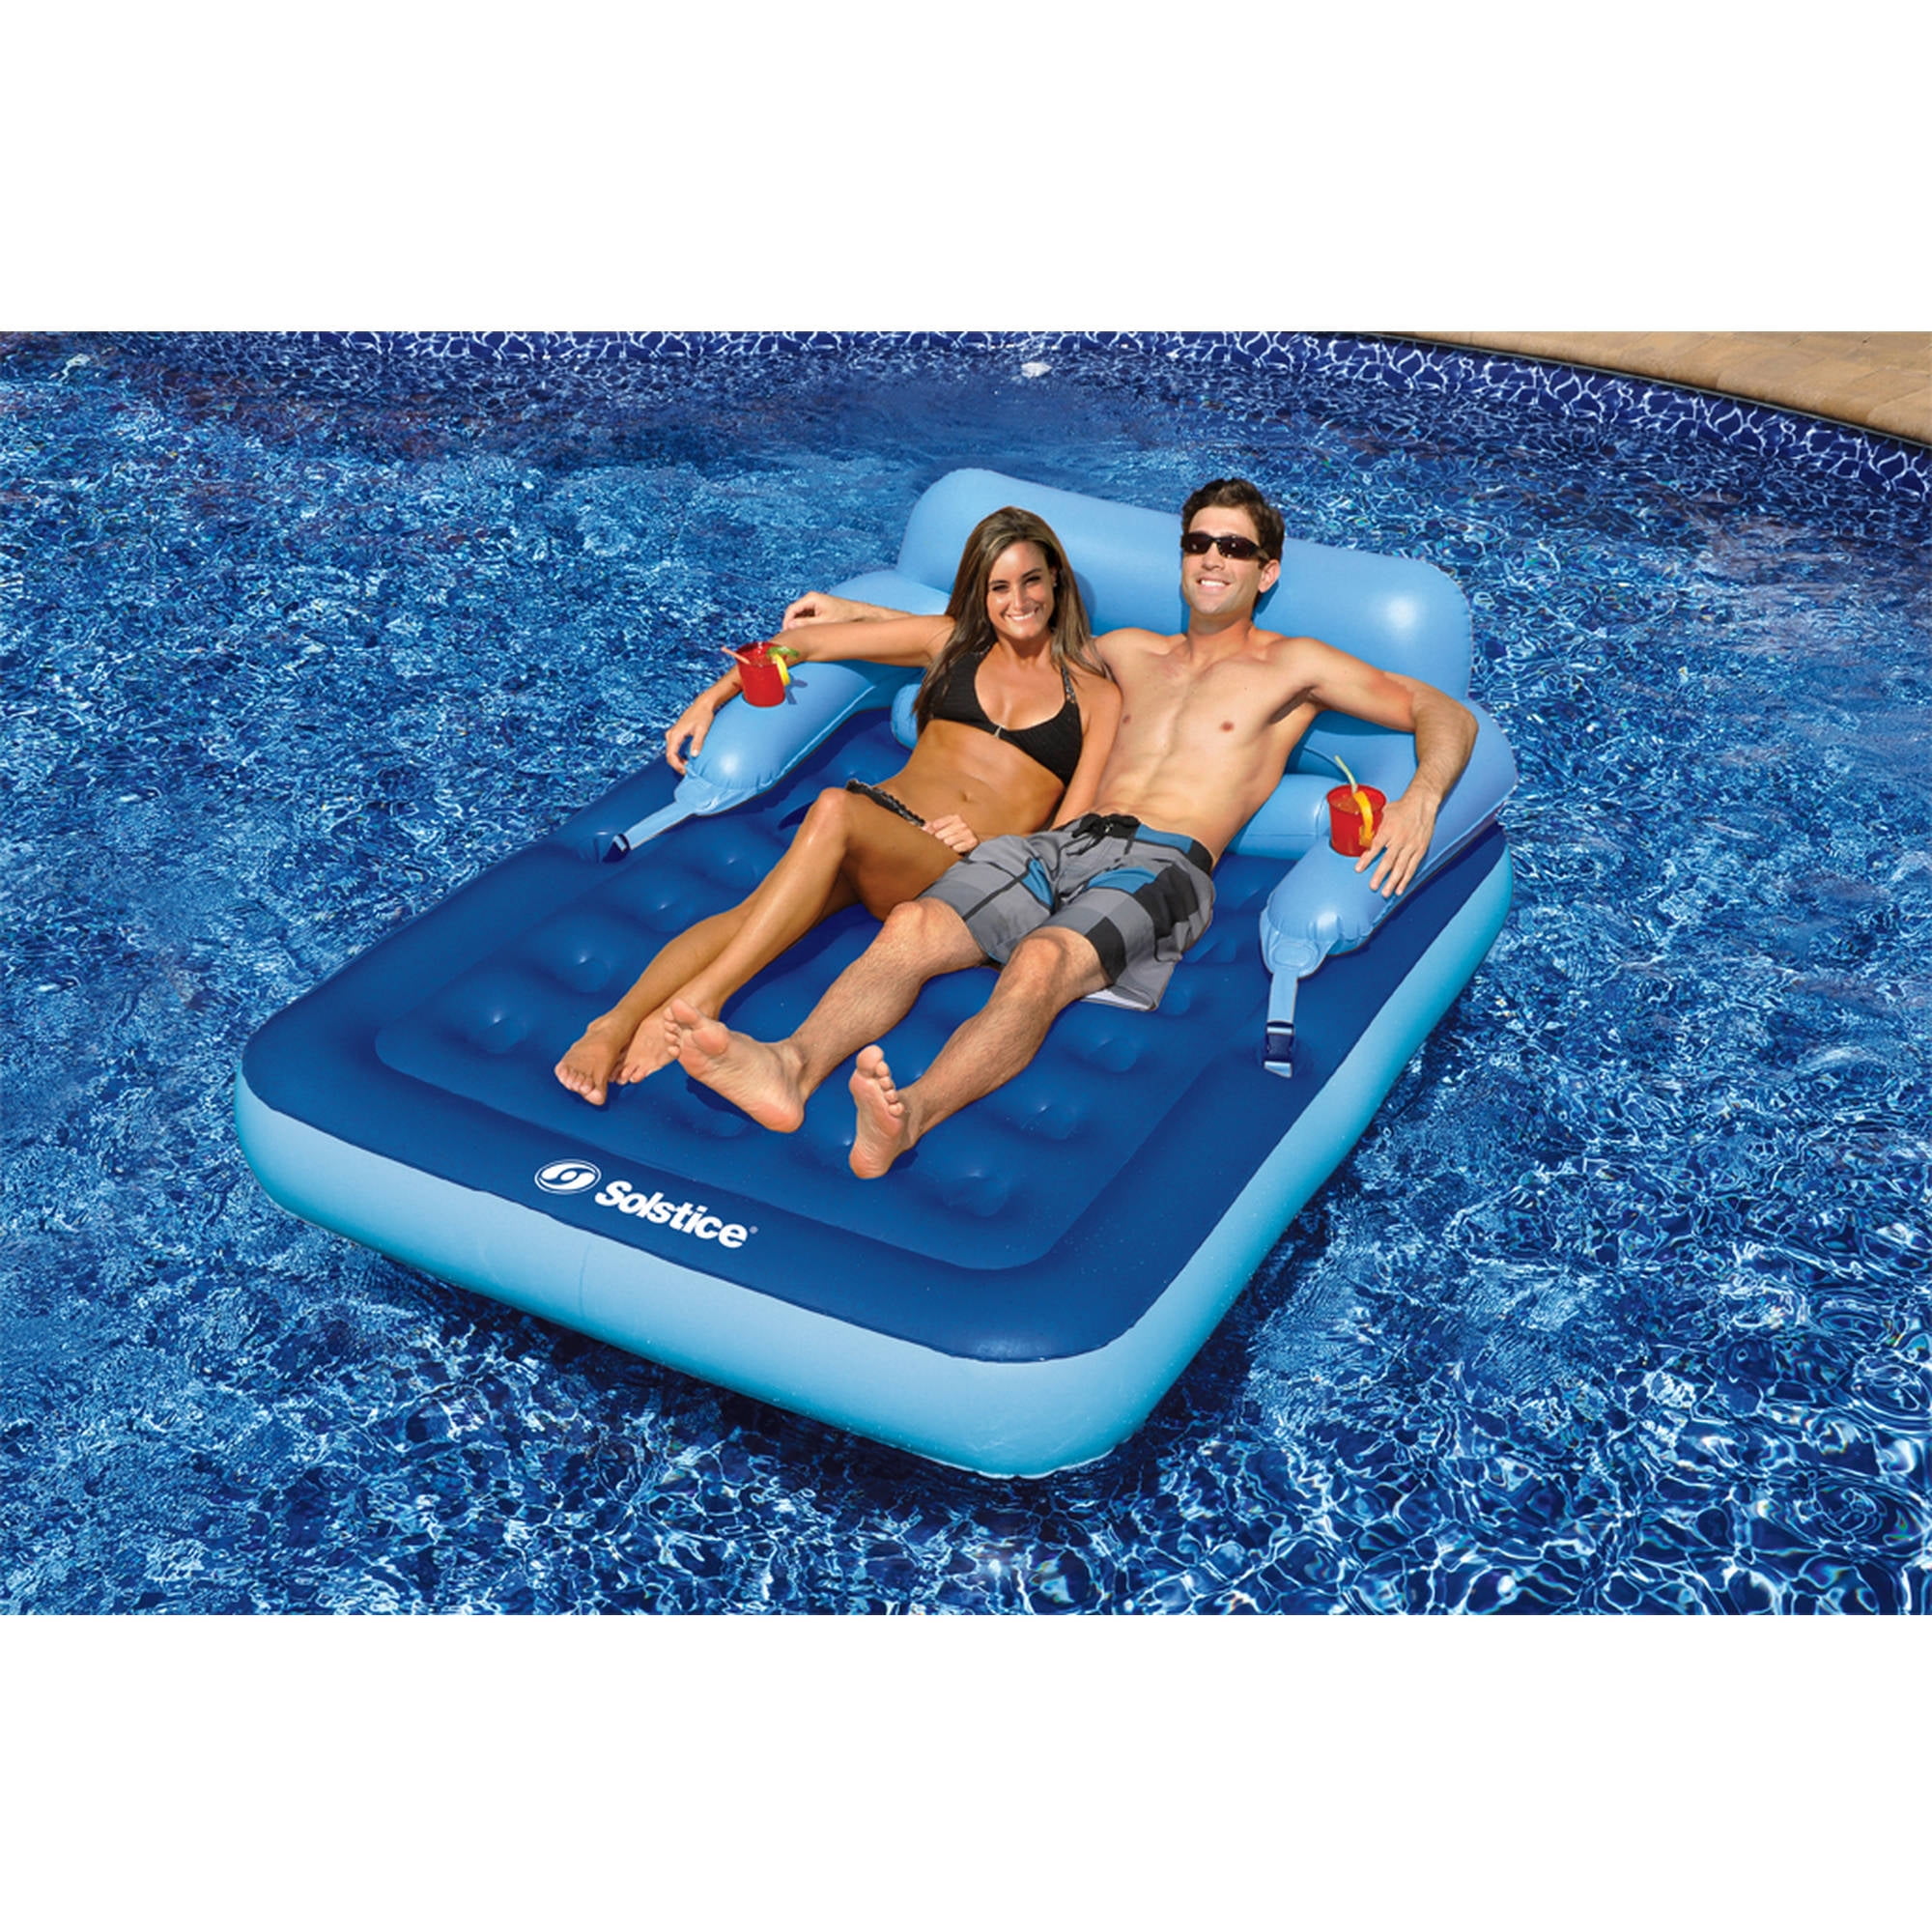 Water Bed Sofa Baokai Inflatable Pool Floats Lounger with Canopy Blue Adult Size Mesh Pool Lounger with Headrest Swimming Pool Raft with Pump Lounge Chair 